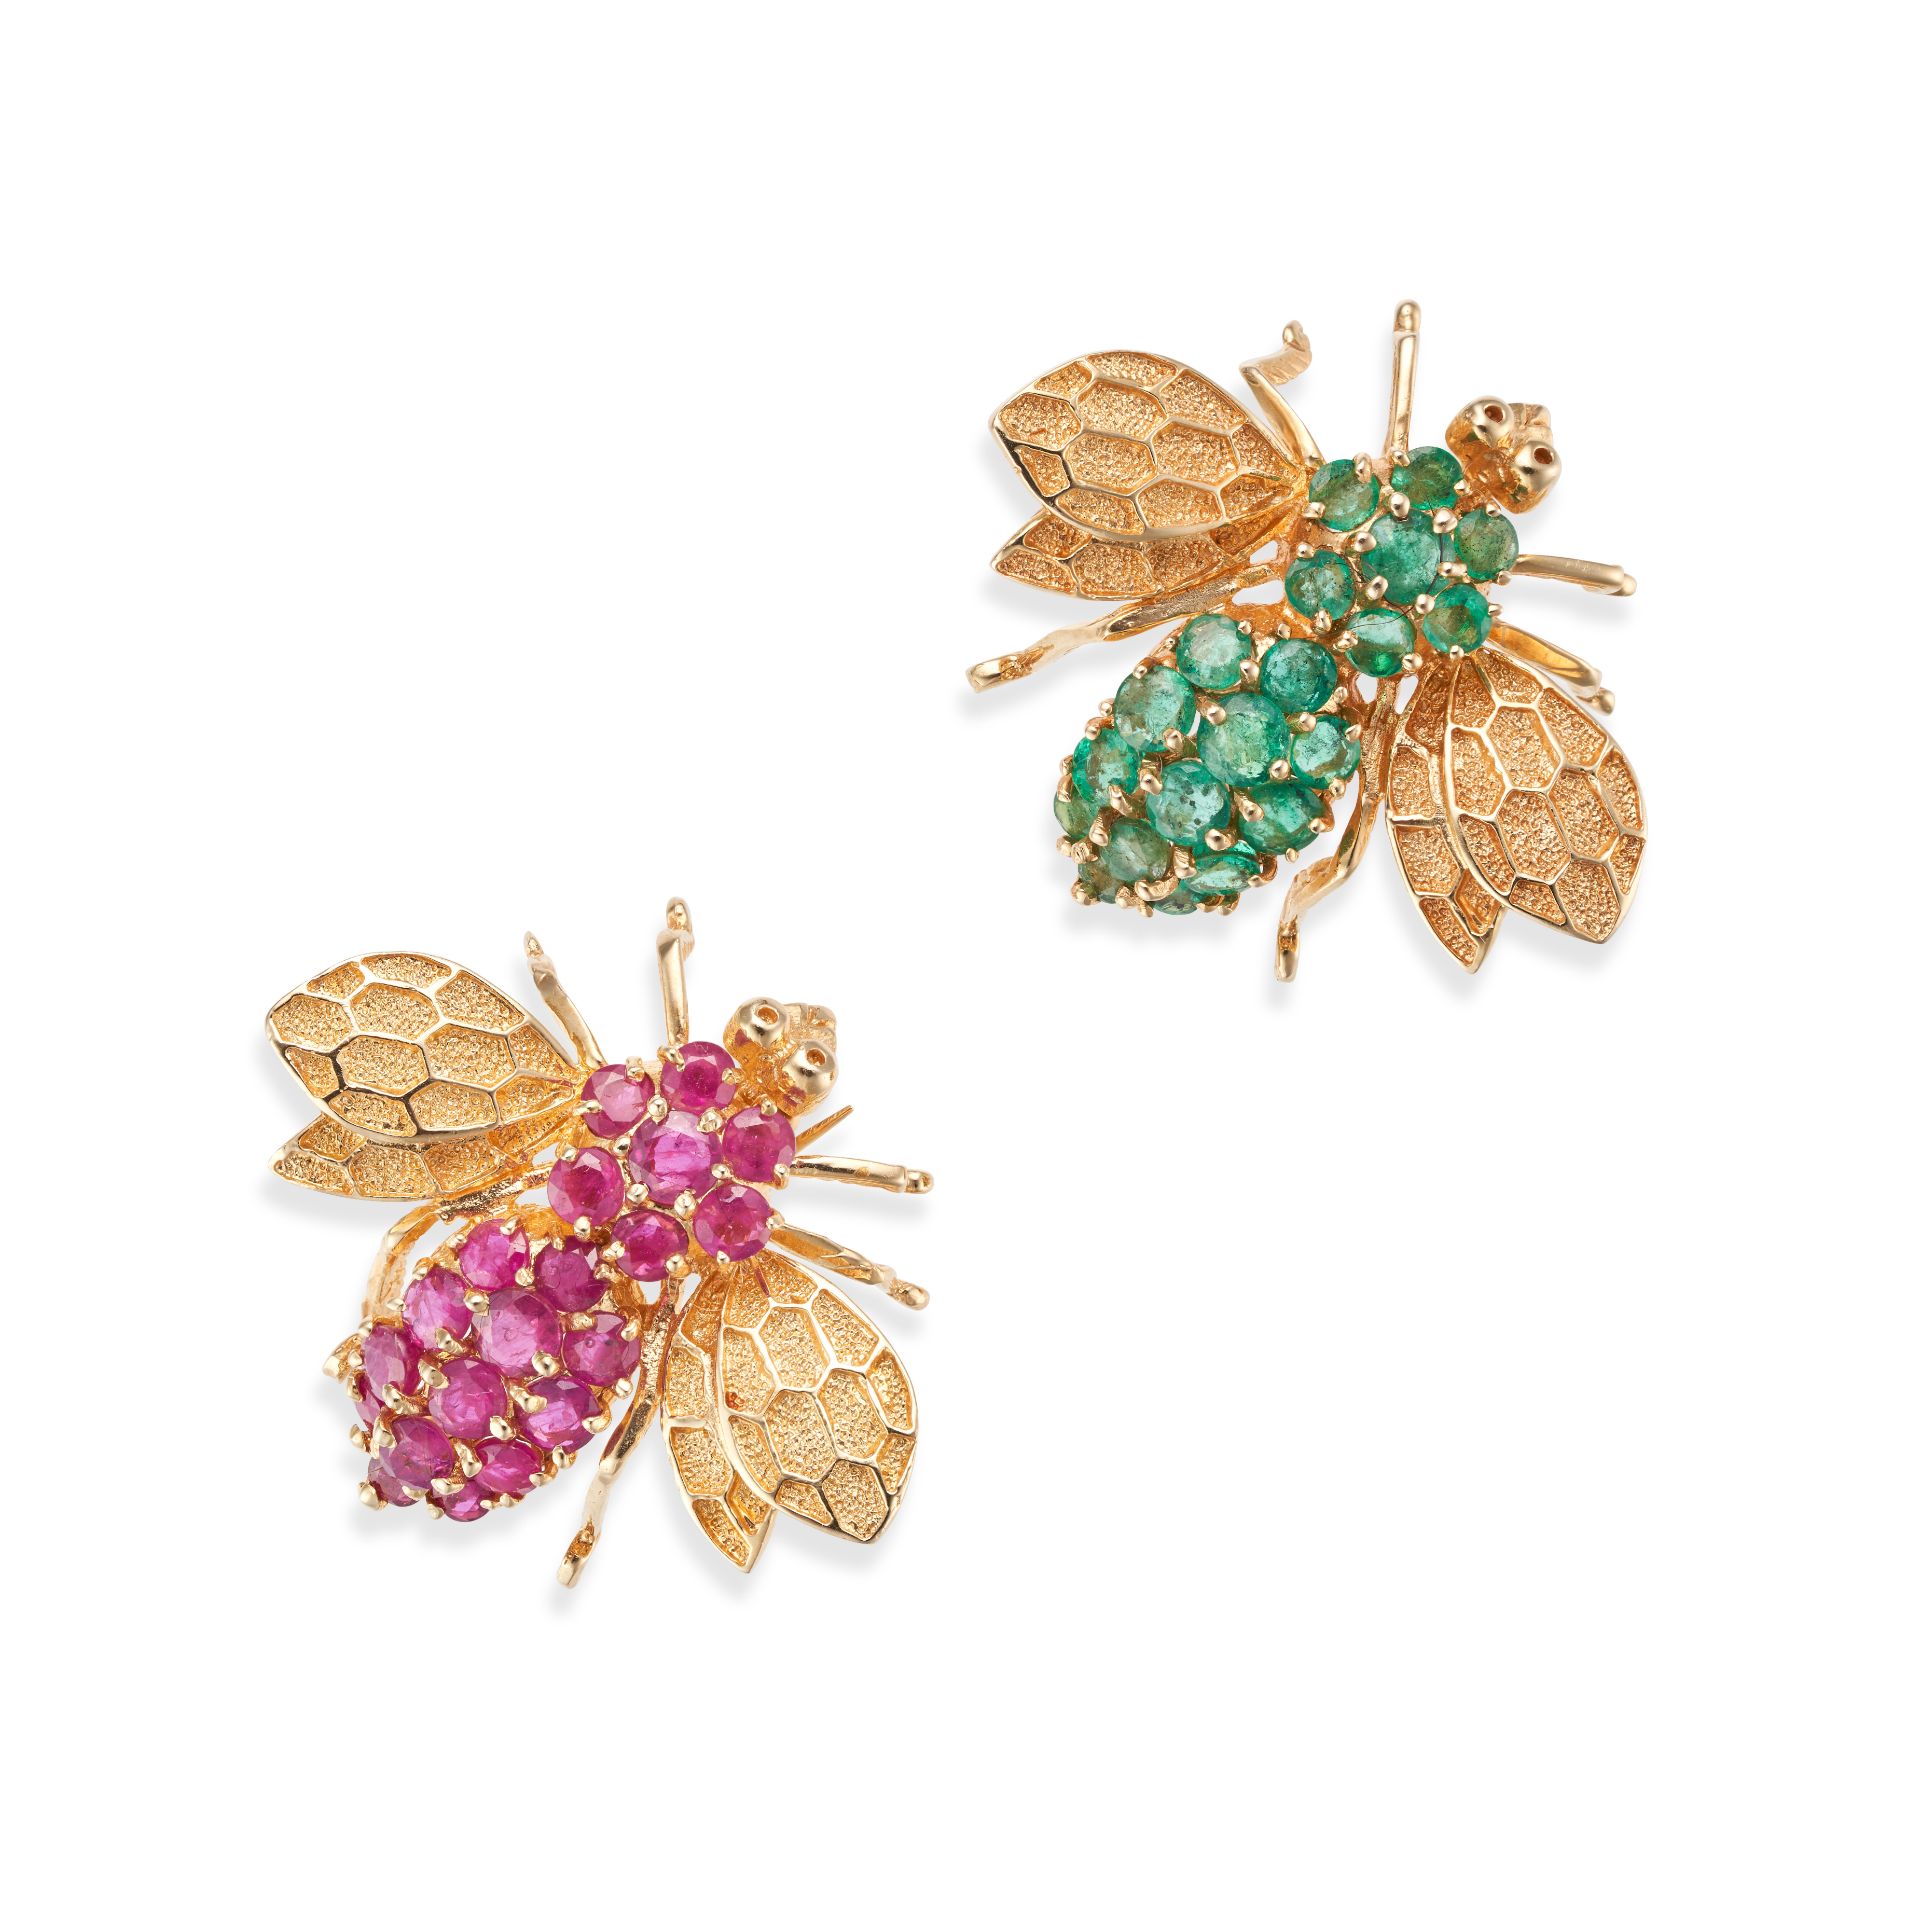 NO RESERVE - A PAIR OF RUBY AND EMERALD BEE BROOCHES each in identical design, one set with round...